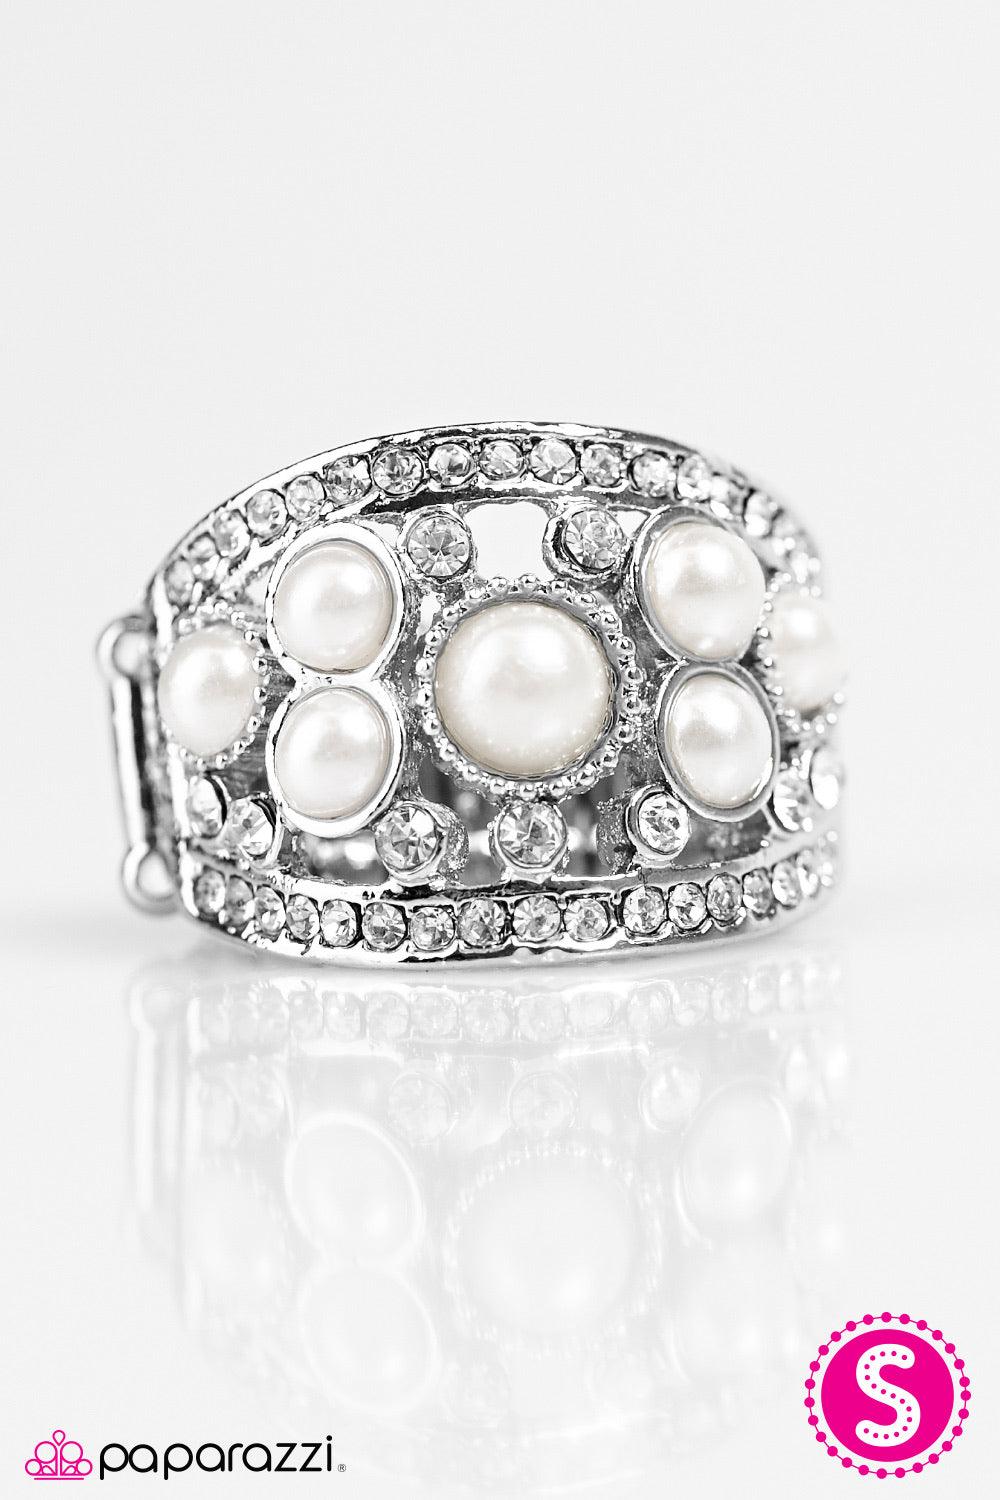 Paparazzi Accessories Hello, Sailor - White Pearly white beading and dainty white rhinestones are sprinkled across the finger, coalescing into a refined frame. Additional white rhinestones are encrusted along the outer edges of the frame, creating an unde